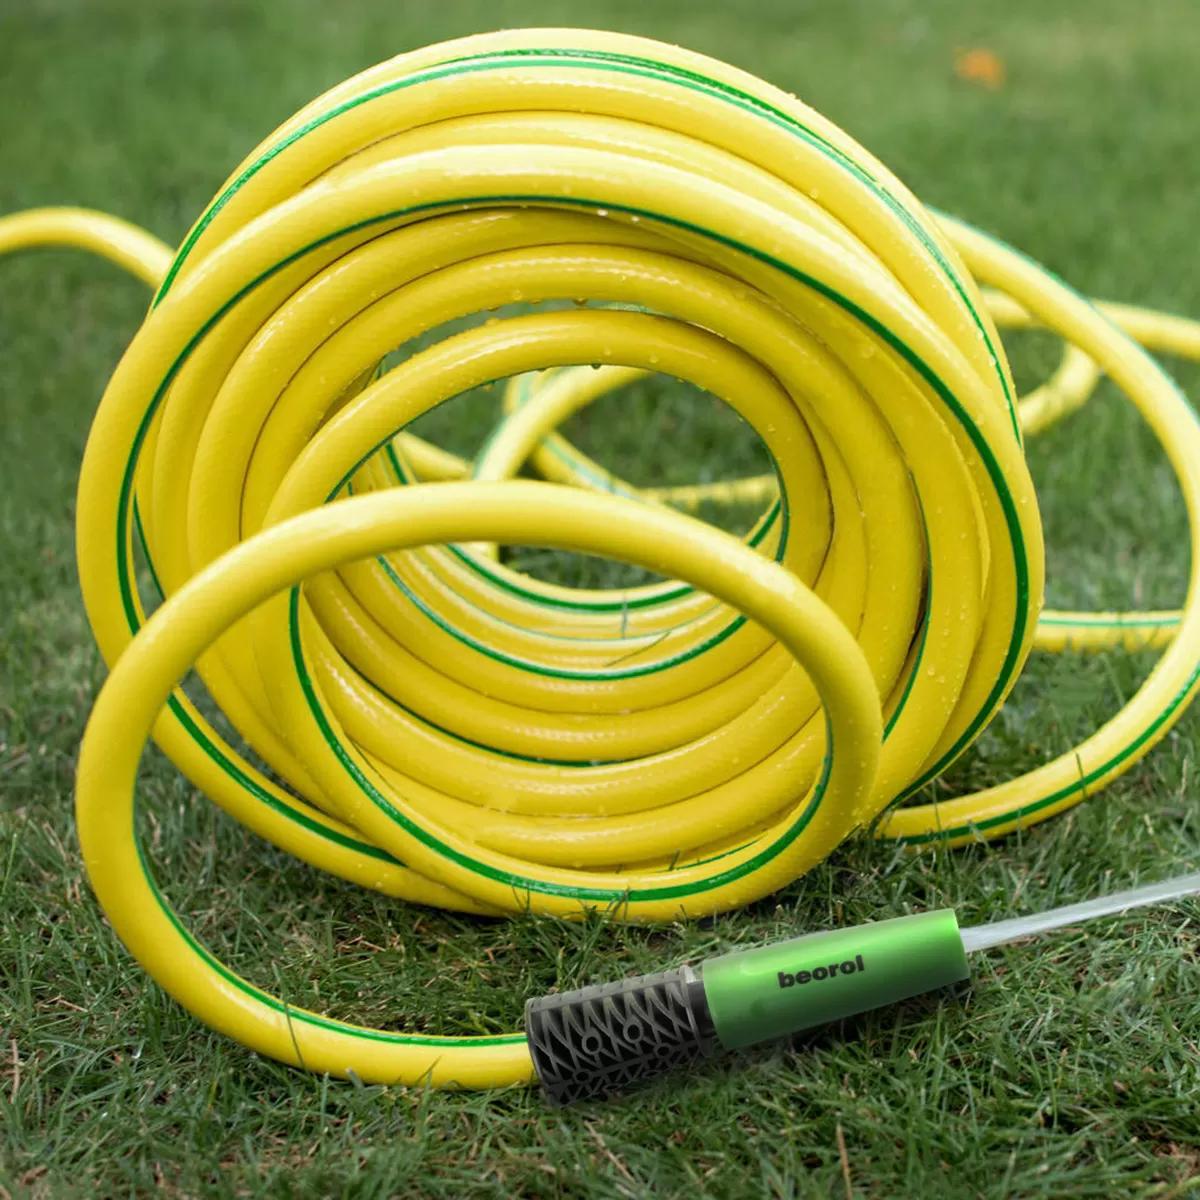 Hose Pipe 50m With Irrigation Gun in Central Division - Garden